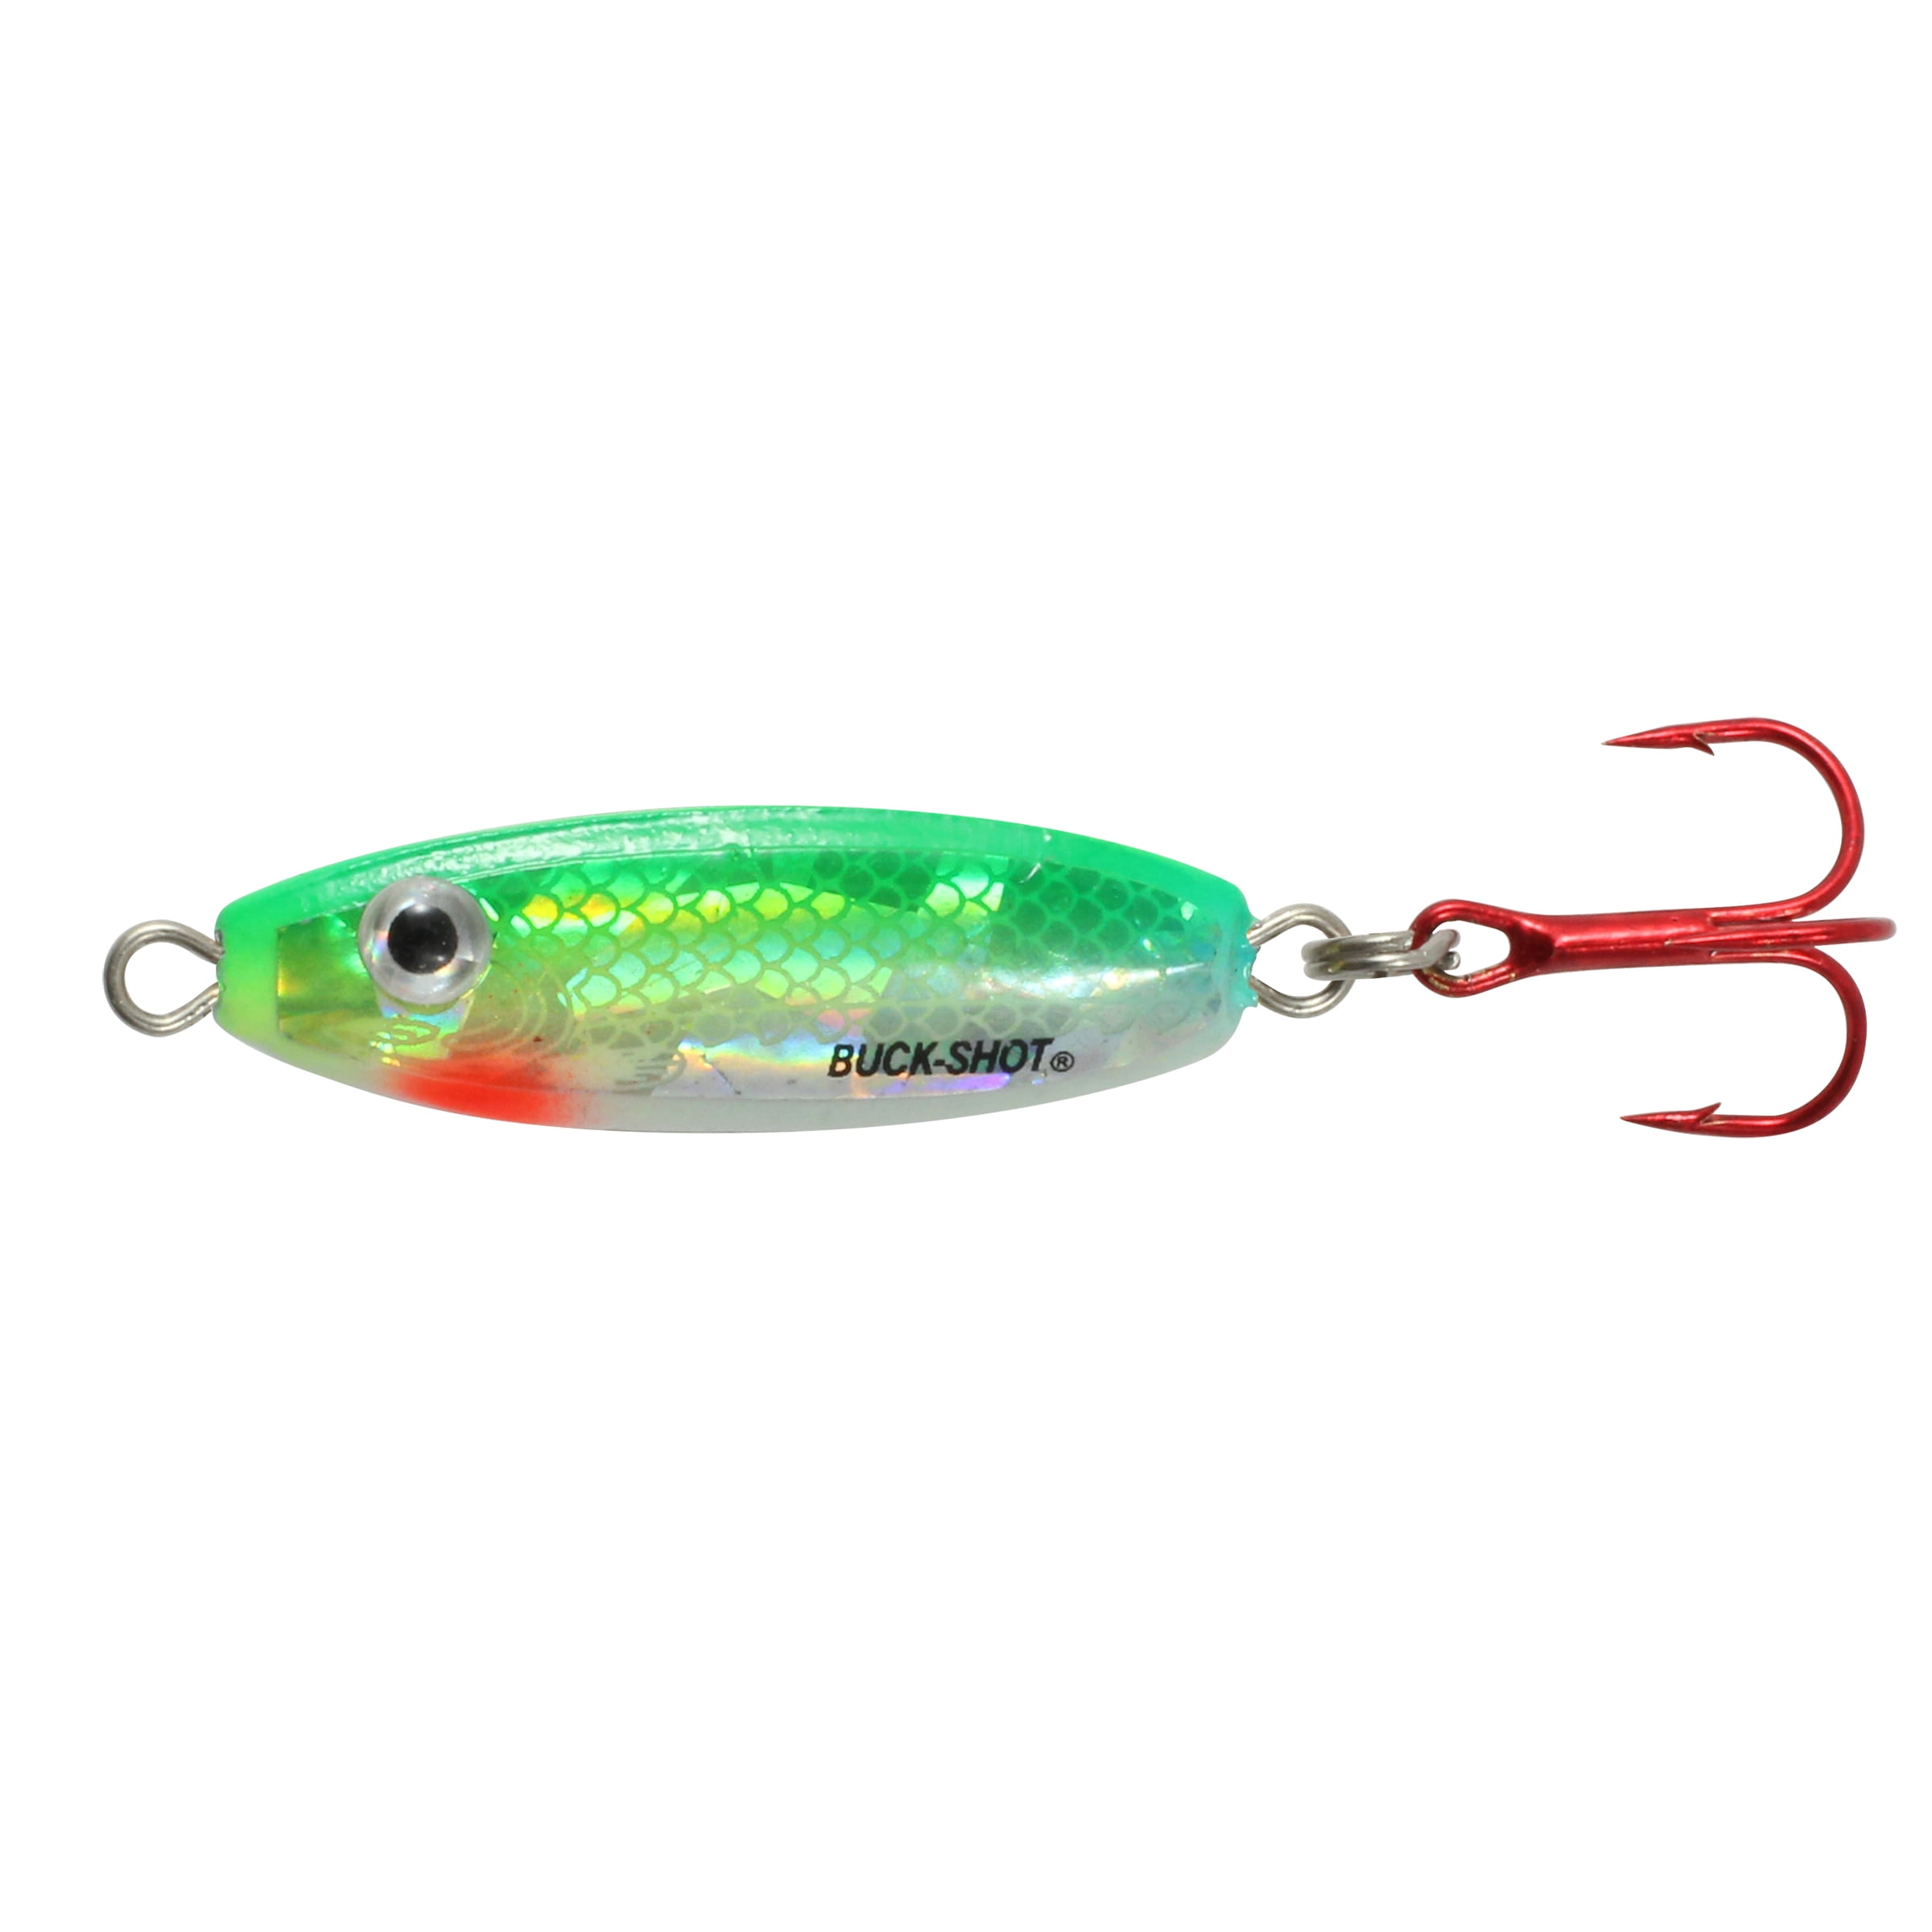 Northland Tackle Buck Shot Rattle Spoon, Freshwater, Super-Glo Perch